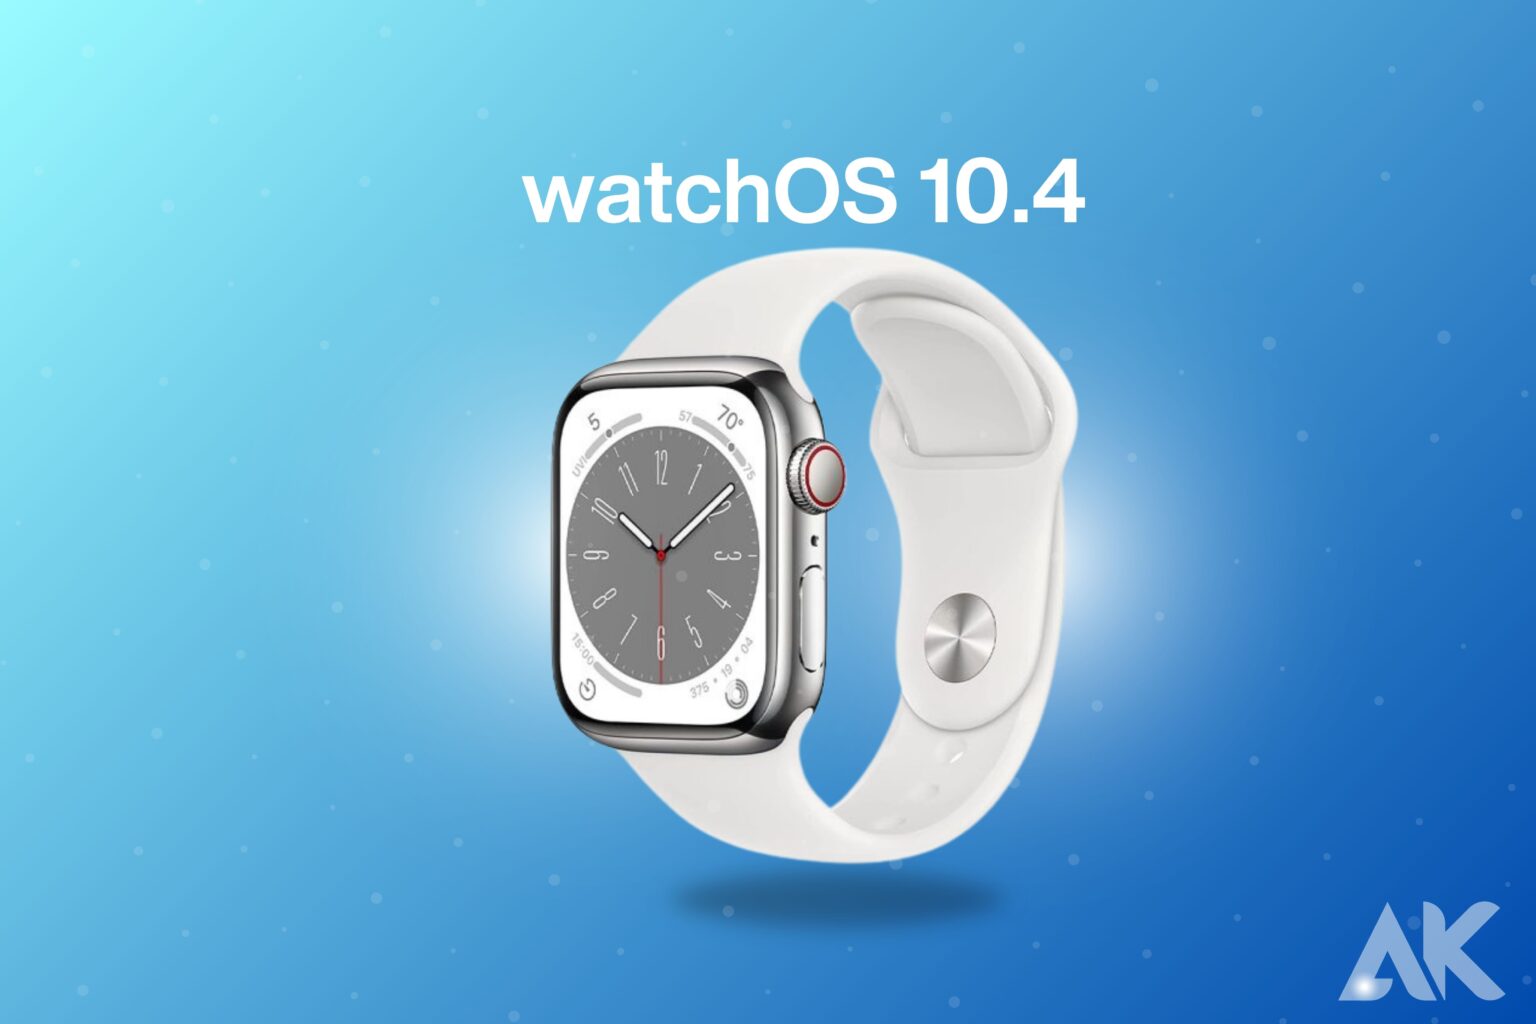 To Update or Not to Update: Weighing the Benefits of WatchOS 10.4